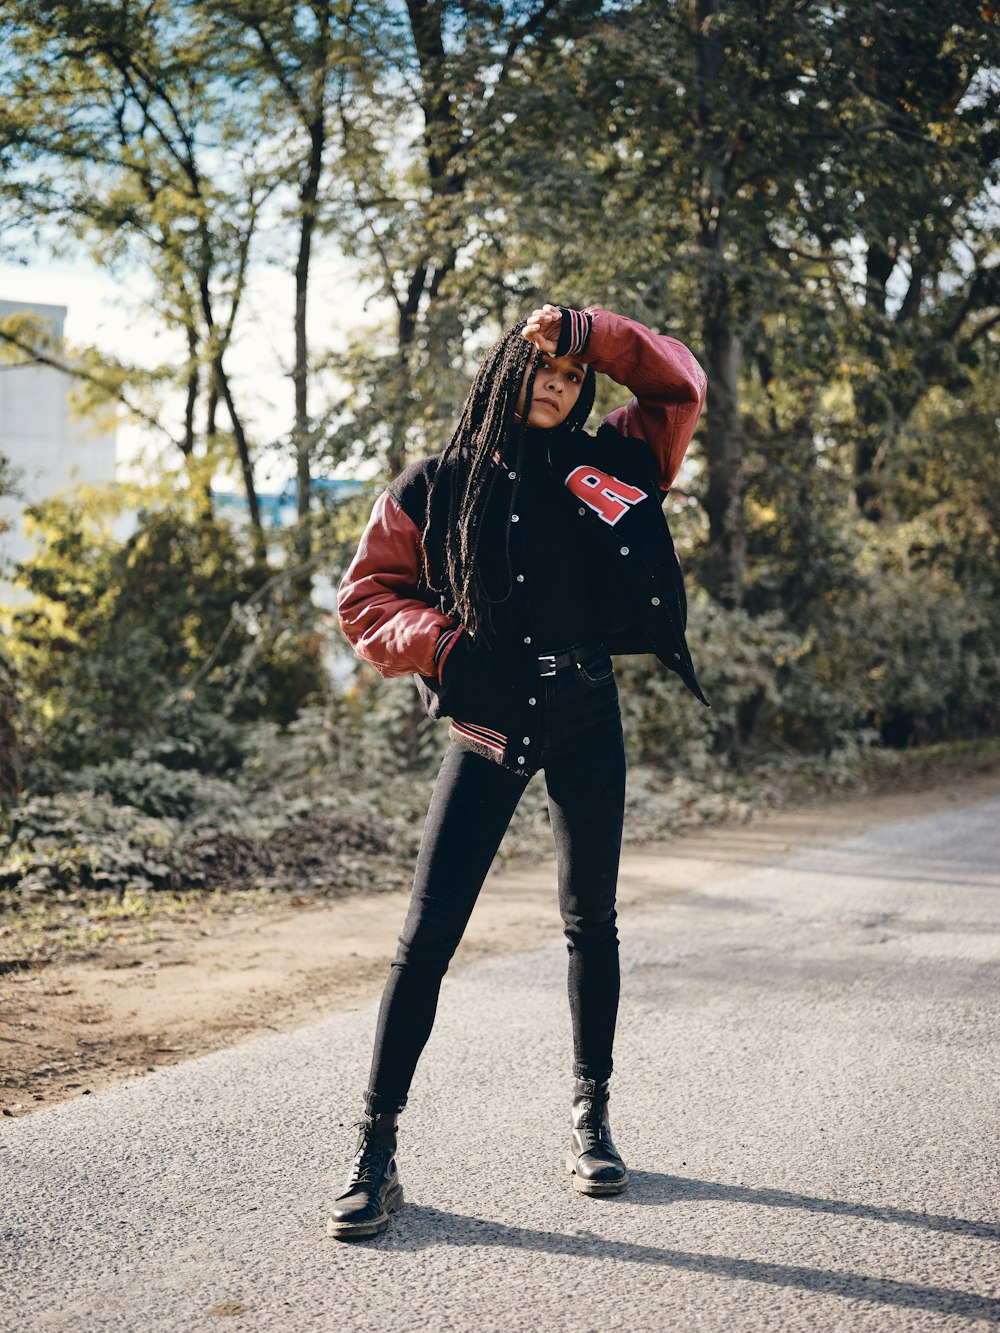 woman in black leather jacket and black pants standing on road during daytime